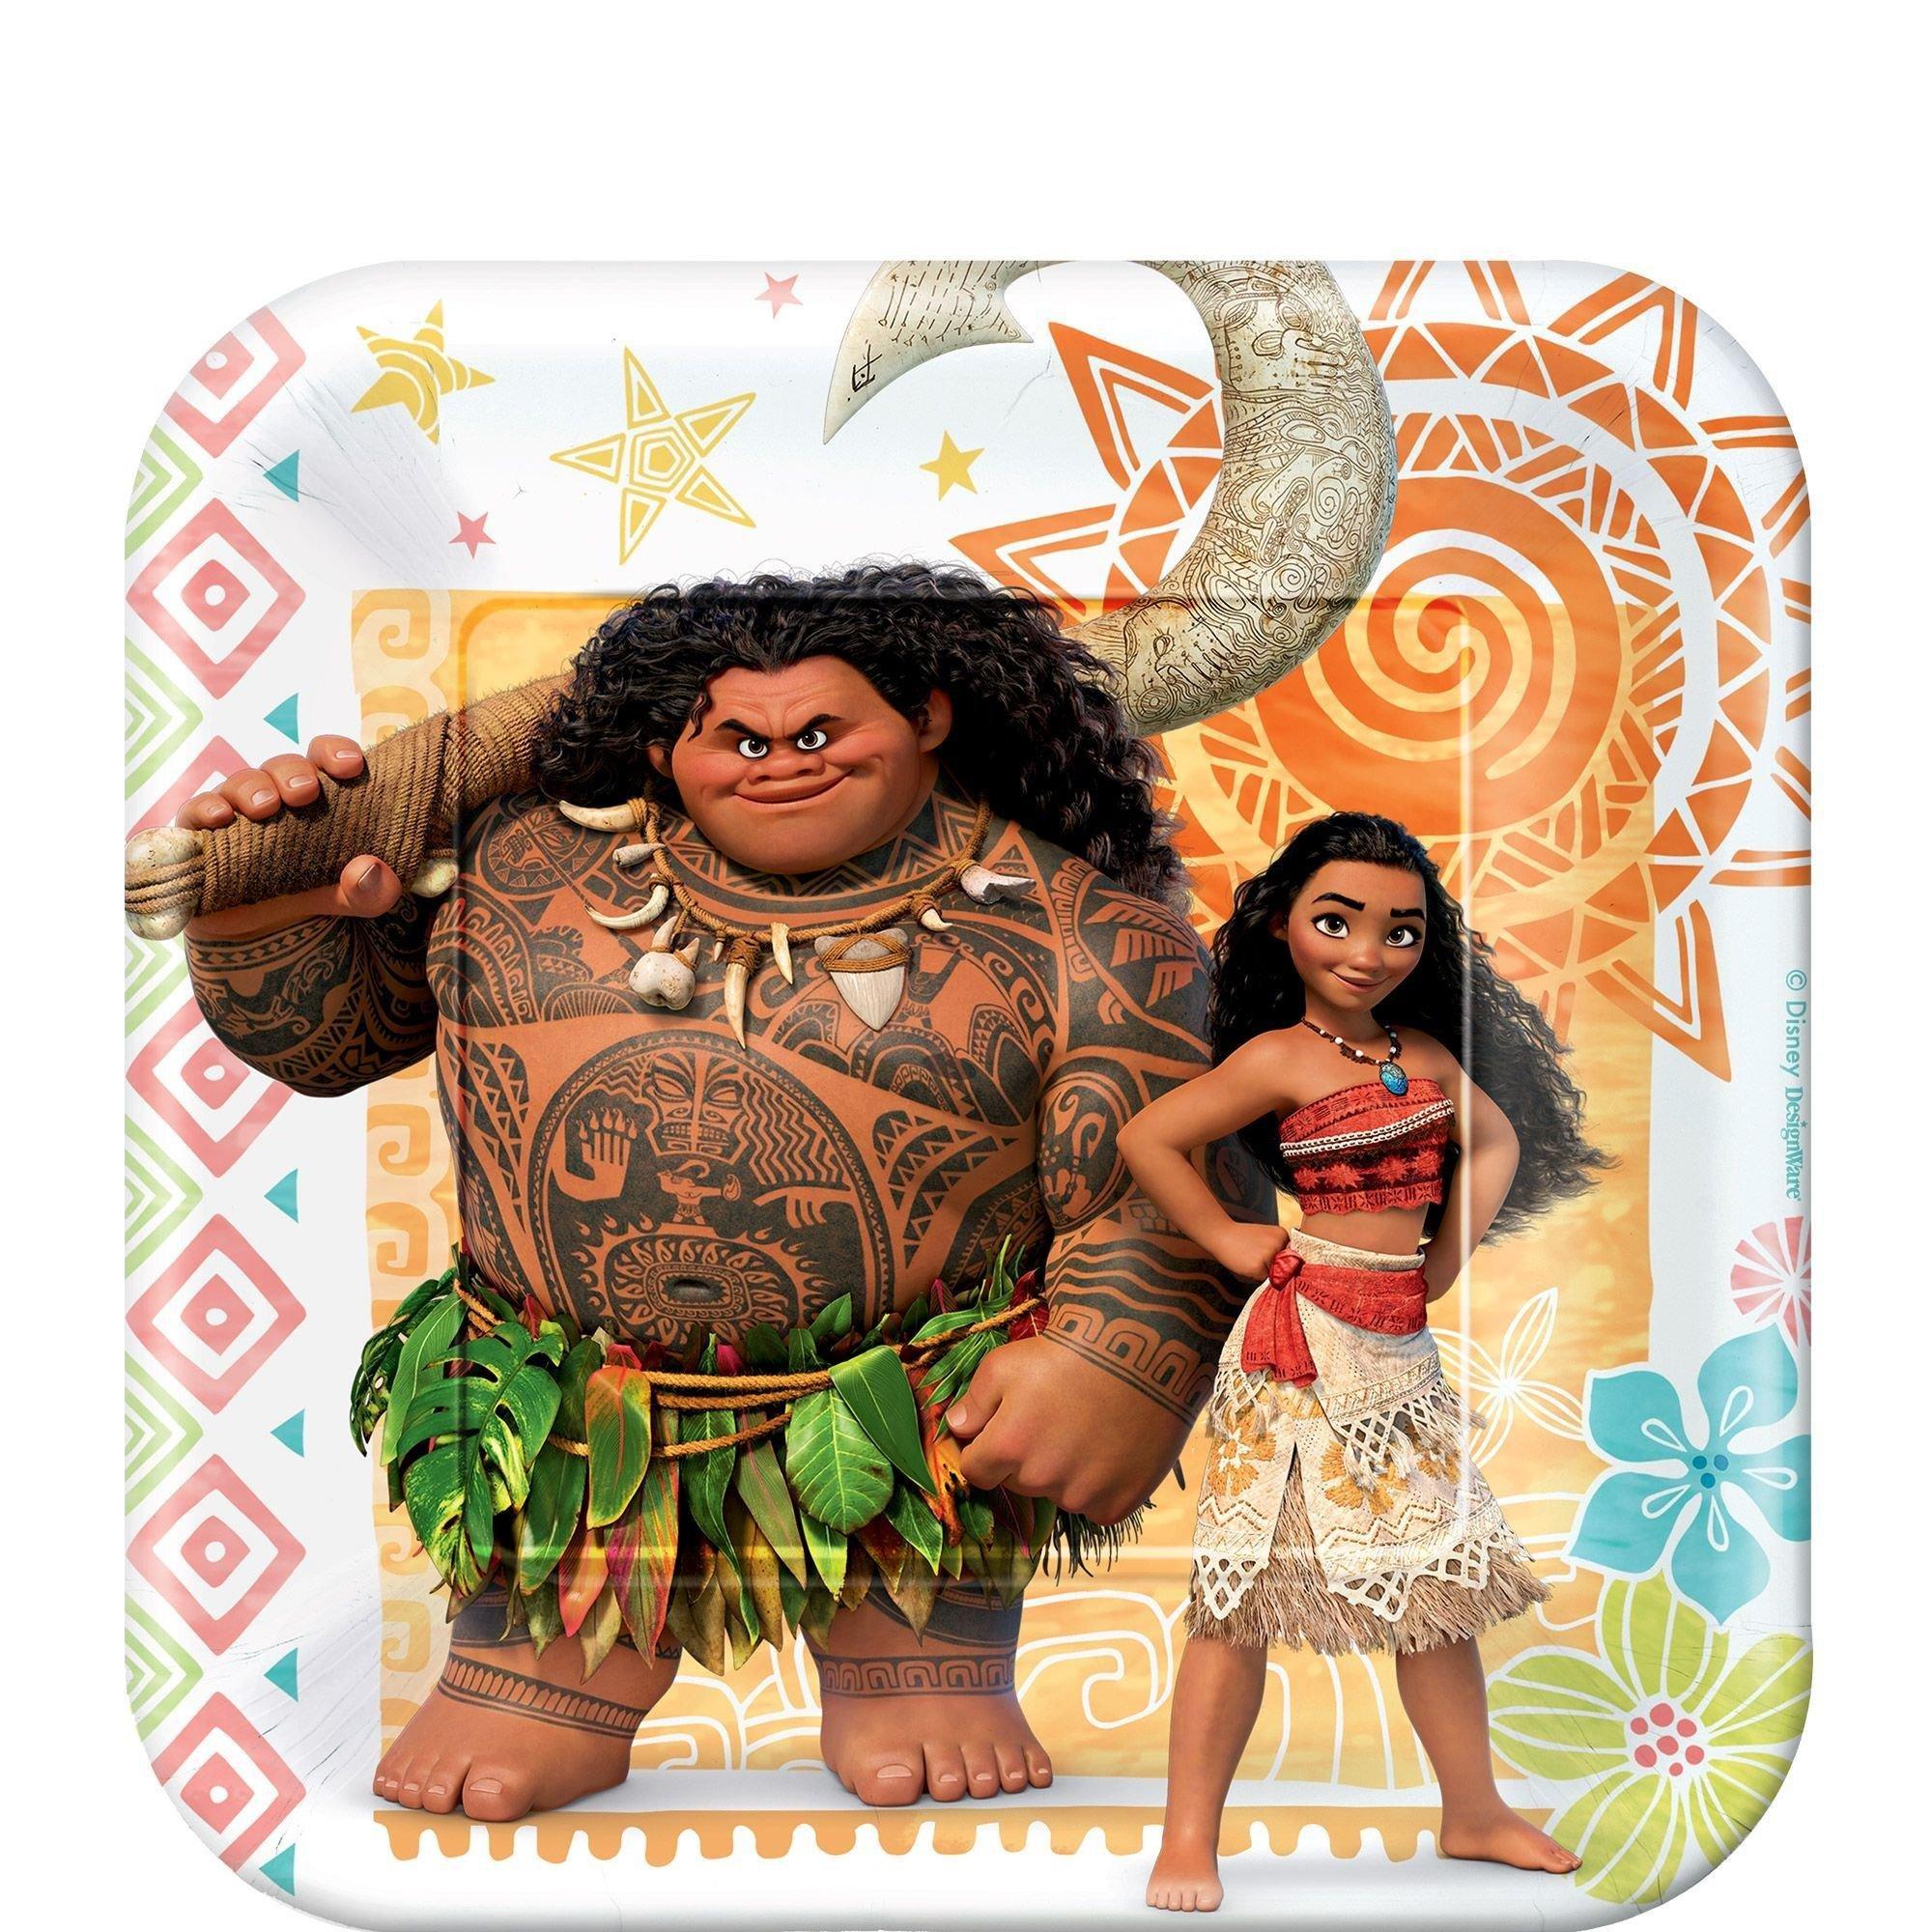 Moana Tableware Birthday Party Supplies Pack for 8 Guests - Kit Includes Plates, Napkins, Cups, Table Cover, Candle & Favor Cup